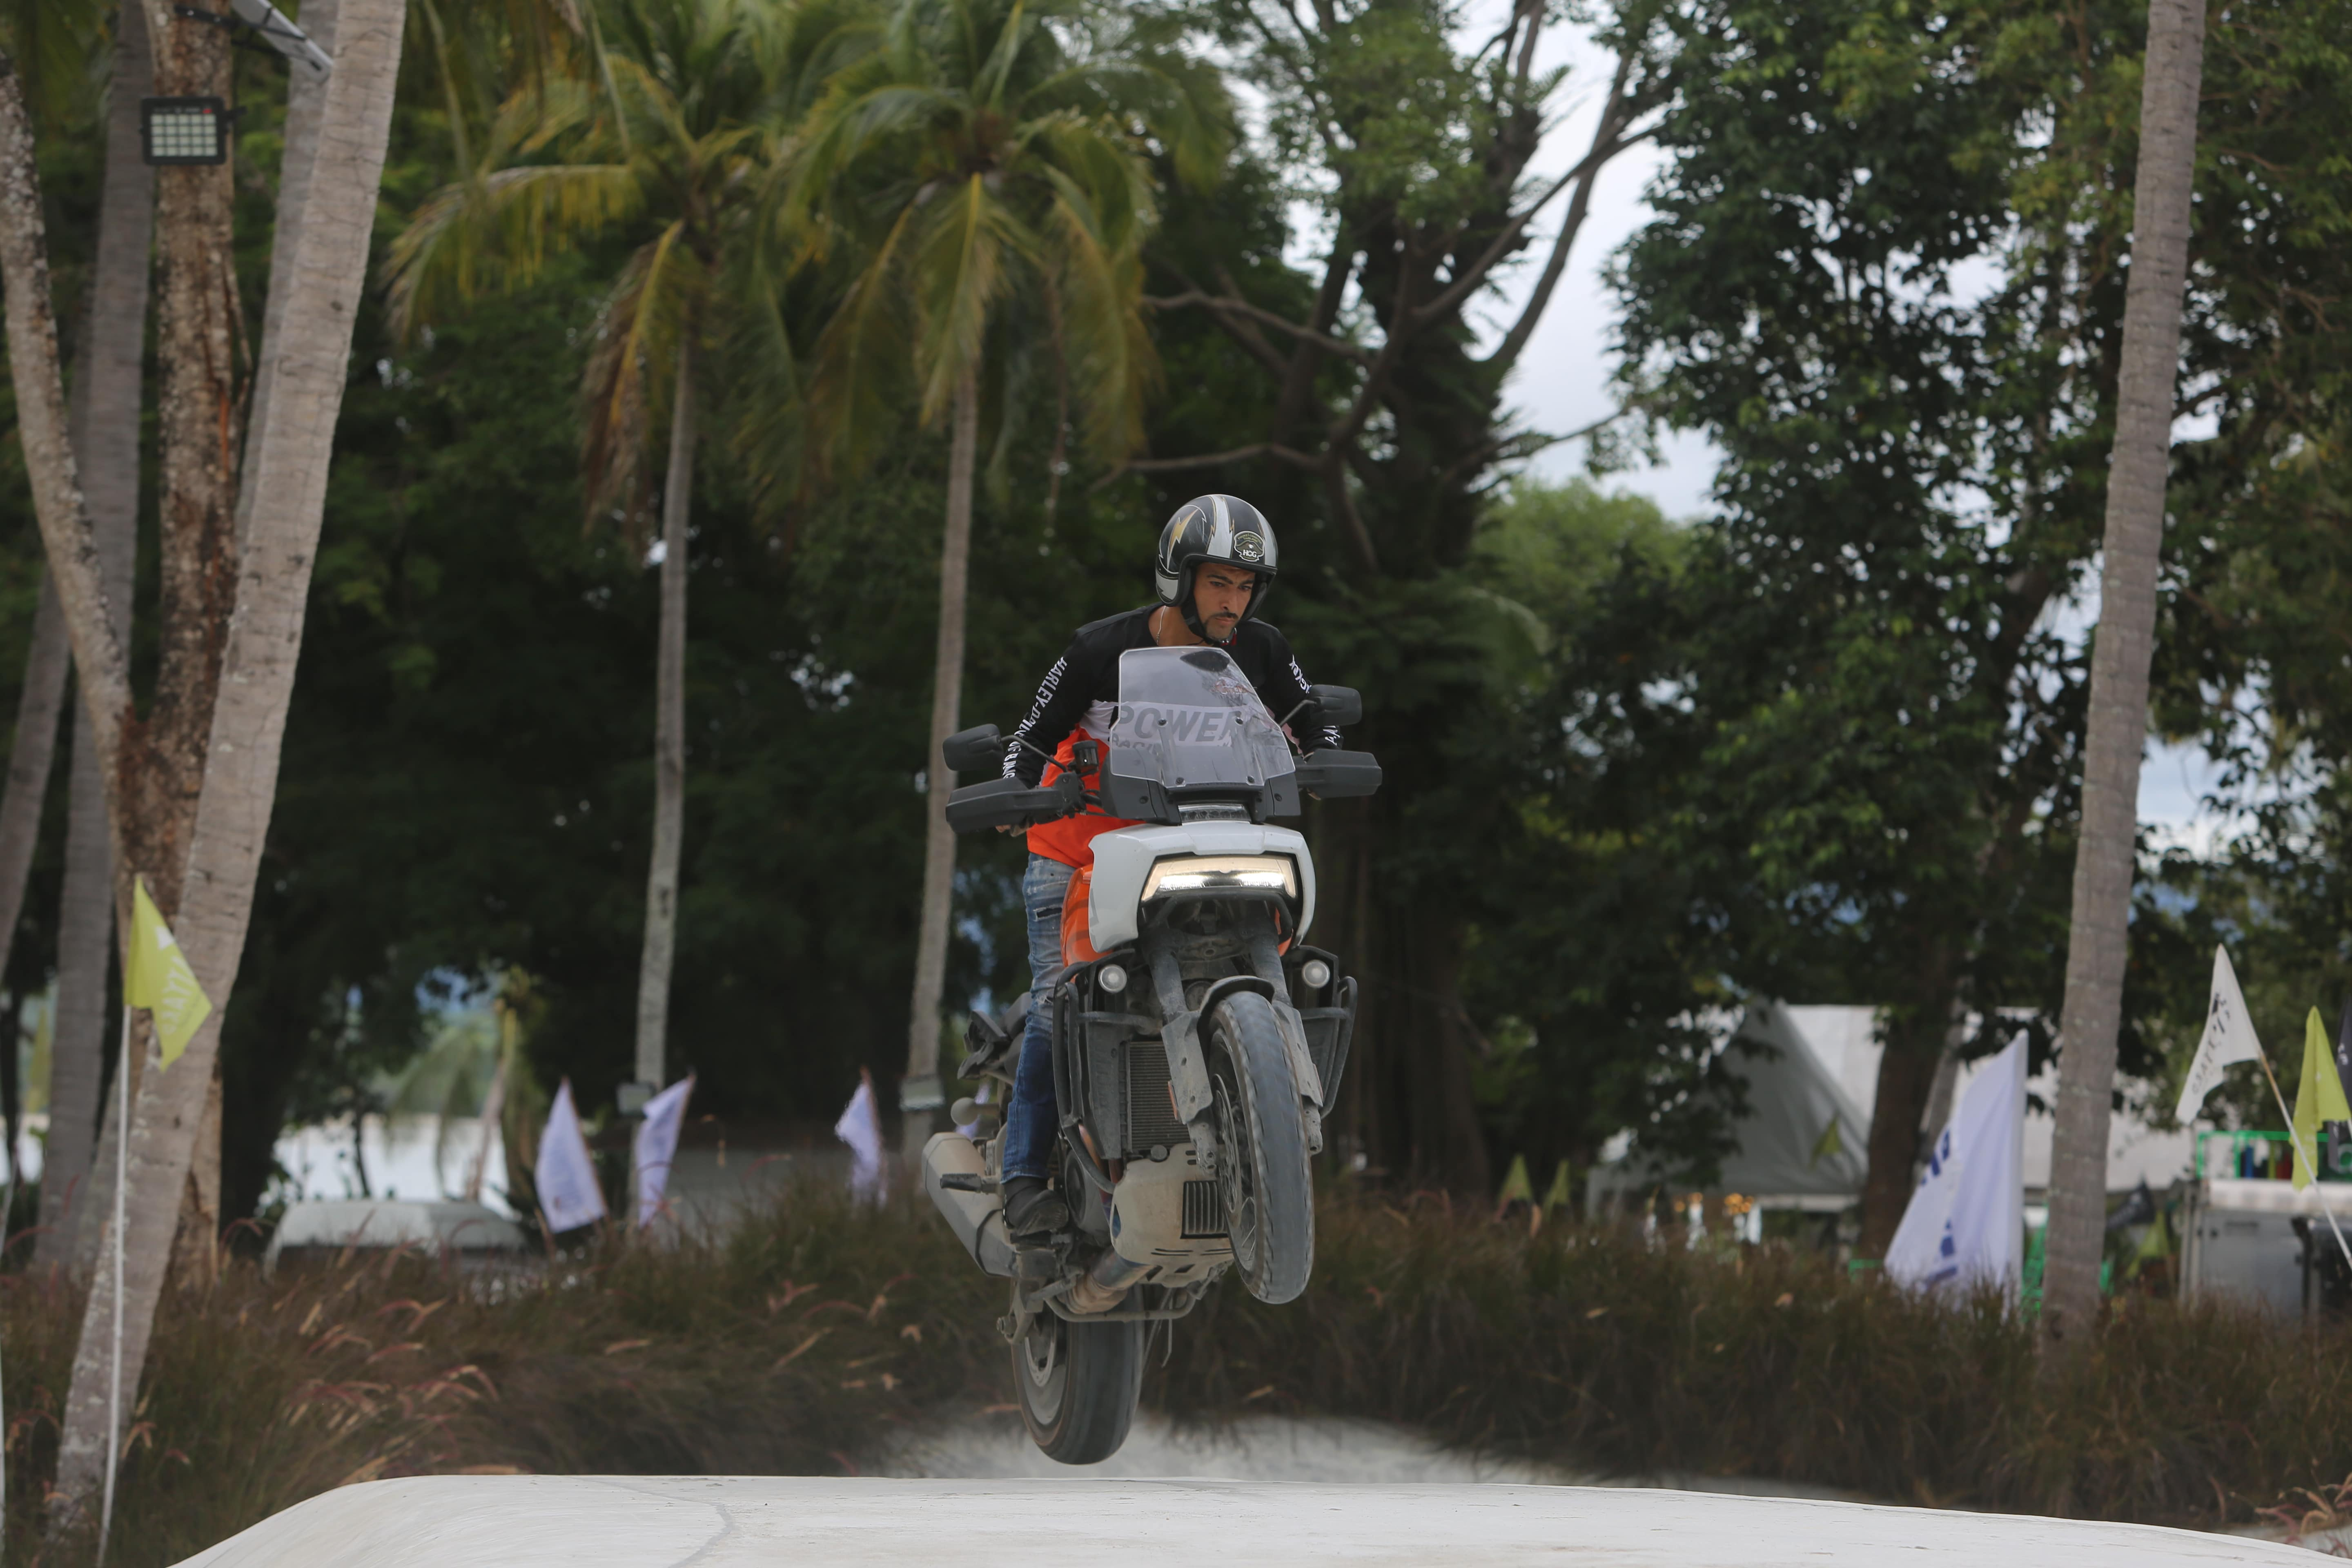 Participants get a glimpse of the all-new Nightster motorcycle. Along with watching a stunt show by former Motocross Champion Rafael Consalvo.  Thailand (2 June 2022) – Harley-Davidson attended the 26th Phuket Bike Week 2022 at The Playyard Phuket Beach, Mai Khao Subdistrict, Phuket Province. Between 13-15 May 2022, the event was attended by more than 20,000 motorcyclists from 30 countries around the world. At the event, there was a special debut of the highly anticipated Nightster™ motorcycle. the most and a Pan America Special motorcycle stunt by Rafael Consalvo that stirred up excitement with those who visited the booth. Harley-Davidson.  “We are delighted that the latest Nightster motorcycle was launched. Receiving attention and being one of the most-watched highlights of the 26th Phuket Bike Week 2022, the Nightster motorcycles inherited the standard from the Sportster motorcycles, and these bikes are a testament to the standard. engine performance and innovative technology of Harley-Davidson" Sajeev Rachkekaran, Managing Director Harley-Davidson For emerging markets in Asia and India, this year Harley-Davidson Phuket (from Power Station Motorsport group) sponsors the Phuket Bike Week together with Harley-Davidson Bangkok, which participates in the event every year.  “This Phuket Bike Week started with a gathering of riders from all over the region. until becoming a large-scale event with international reputation It is also an event for riders from Asia. As the 26th Phuket Bike Week, our team is delighted that the newest Nightster™ bikes have been welcomed. And we would like to thank our customers for their overwhelming interest in this bike,” said Giovanni Tebano, General Manager of Official Dealerships. Harley-Davidson Phuket said.  This event was also honored by Mr. Narong Wuxiu, Governor of Phuket. Along with delegations from the Ministry of Tourism and Sports attended the event, including members. Harley-Davidson Owners Group (HOG) Phuket Chapter Harley-Davidson fans and many motorcyclists.  Follow stories and updates from Harley-Davidson. in emerging markets in Asia by tracking Harley-Davidson through the following channels.